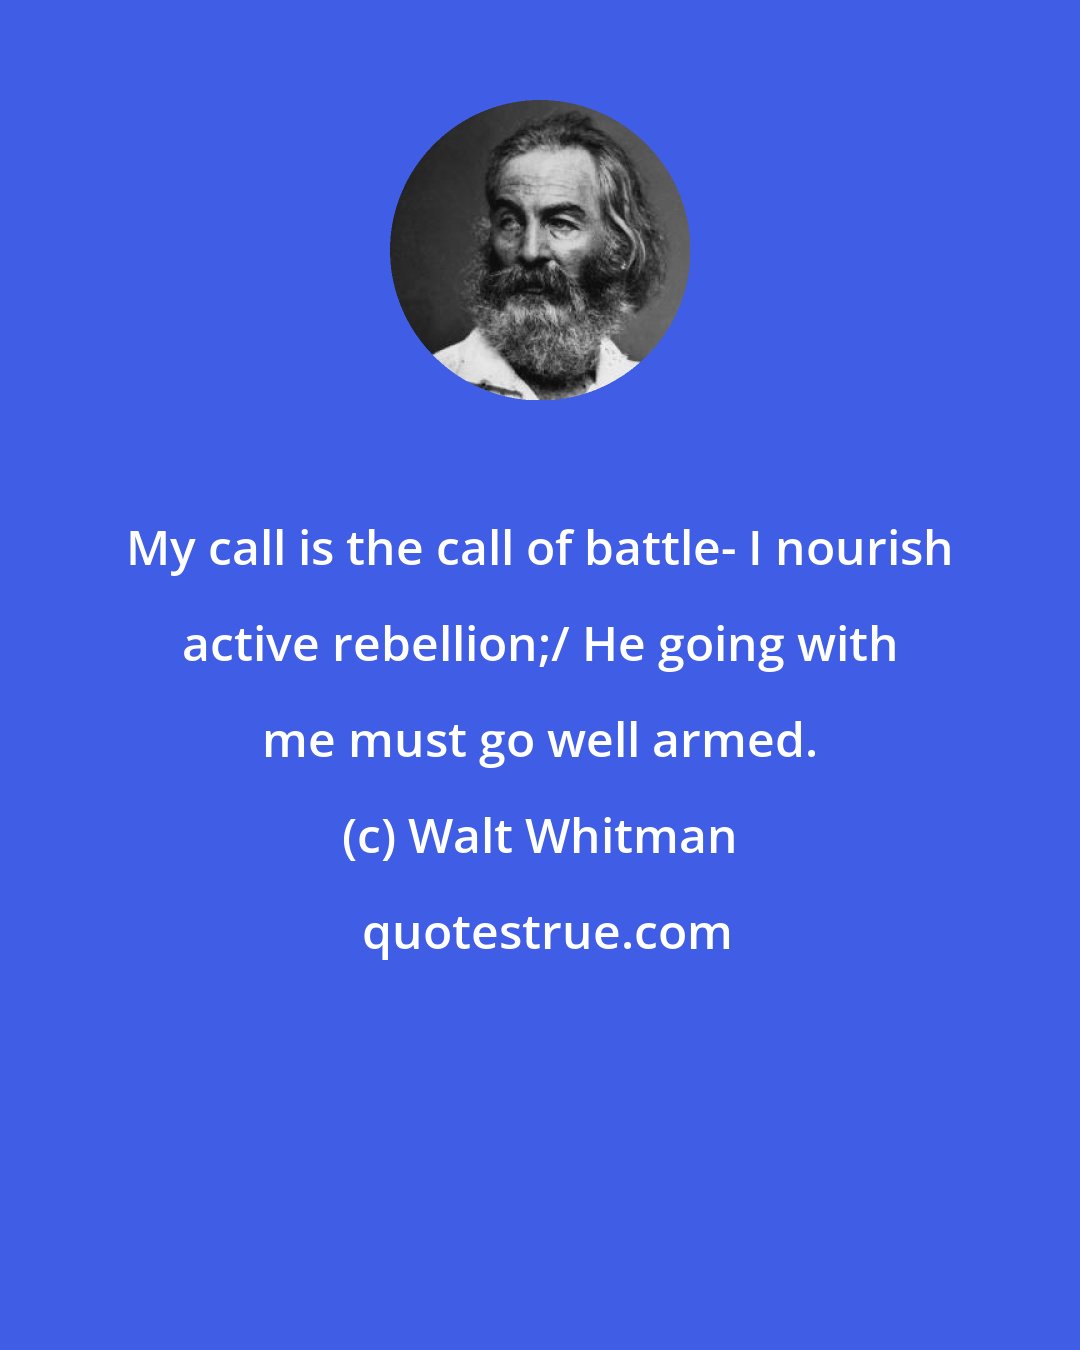 Walt Whitman: My call is the call of battle- I nourish active rebellion;/ He going with me must go well armed.